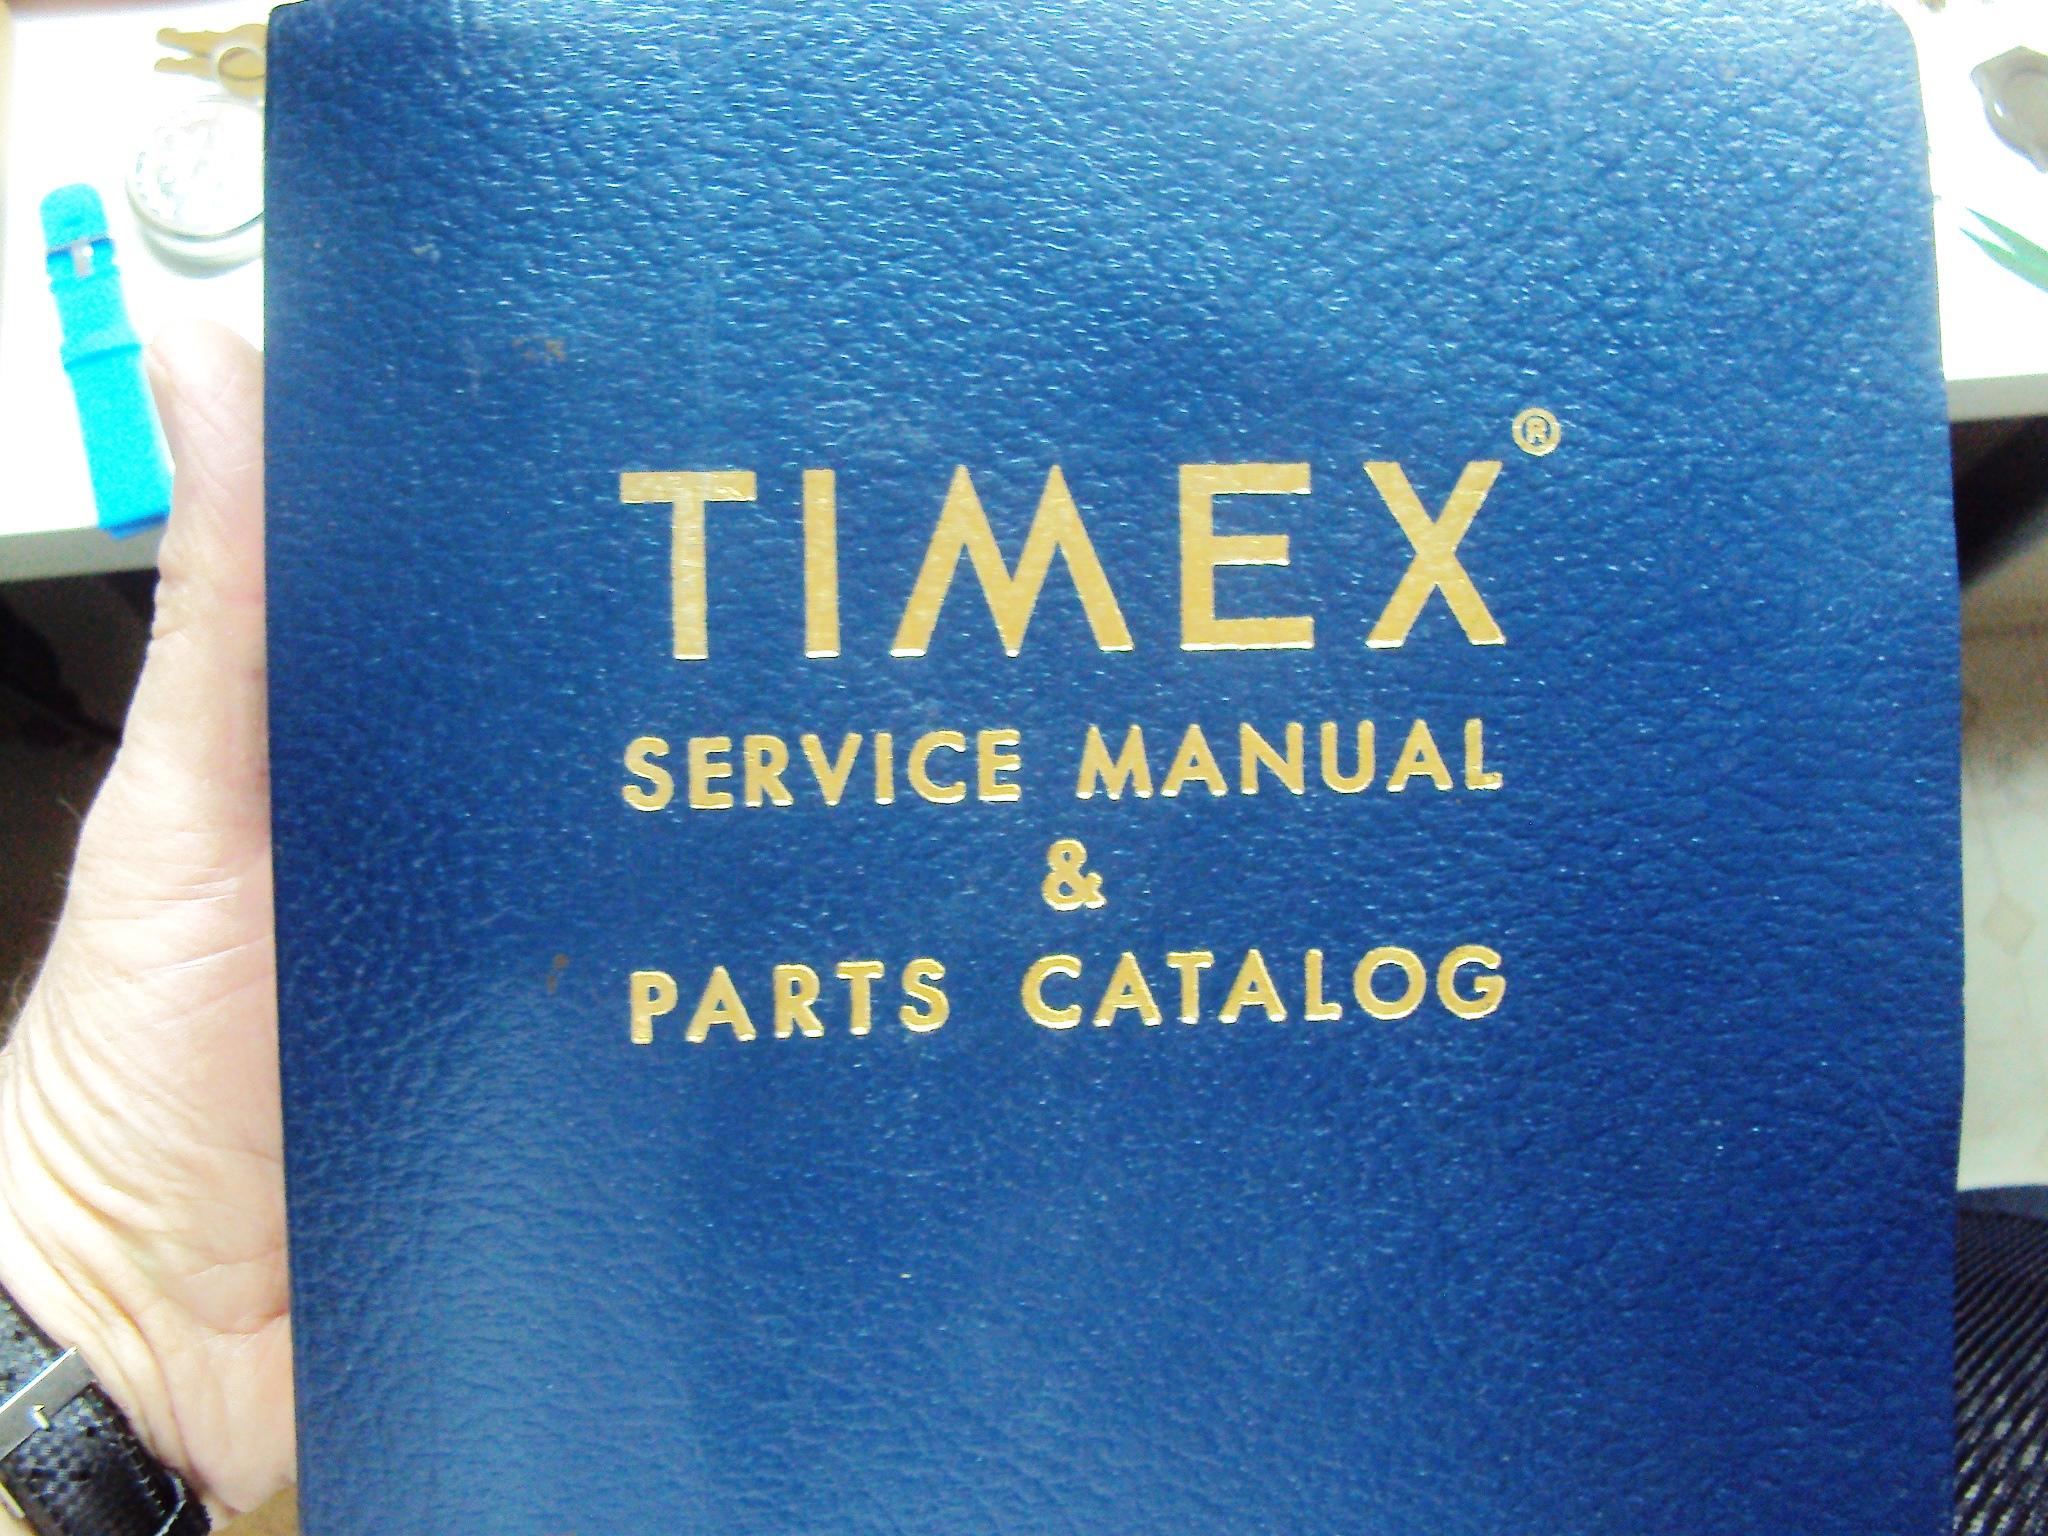 Vintage US Time \ Timex why the question ... - Your Watch Collection -  Watch Repair Talk